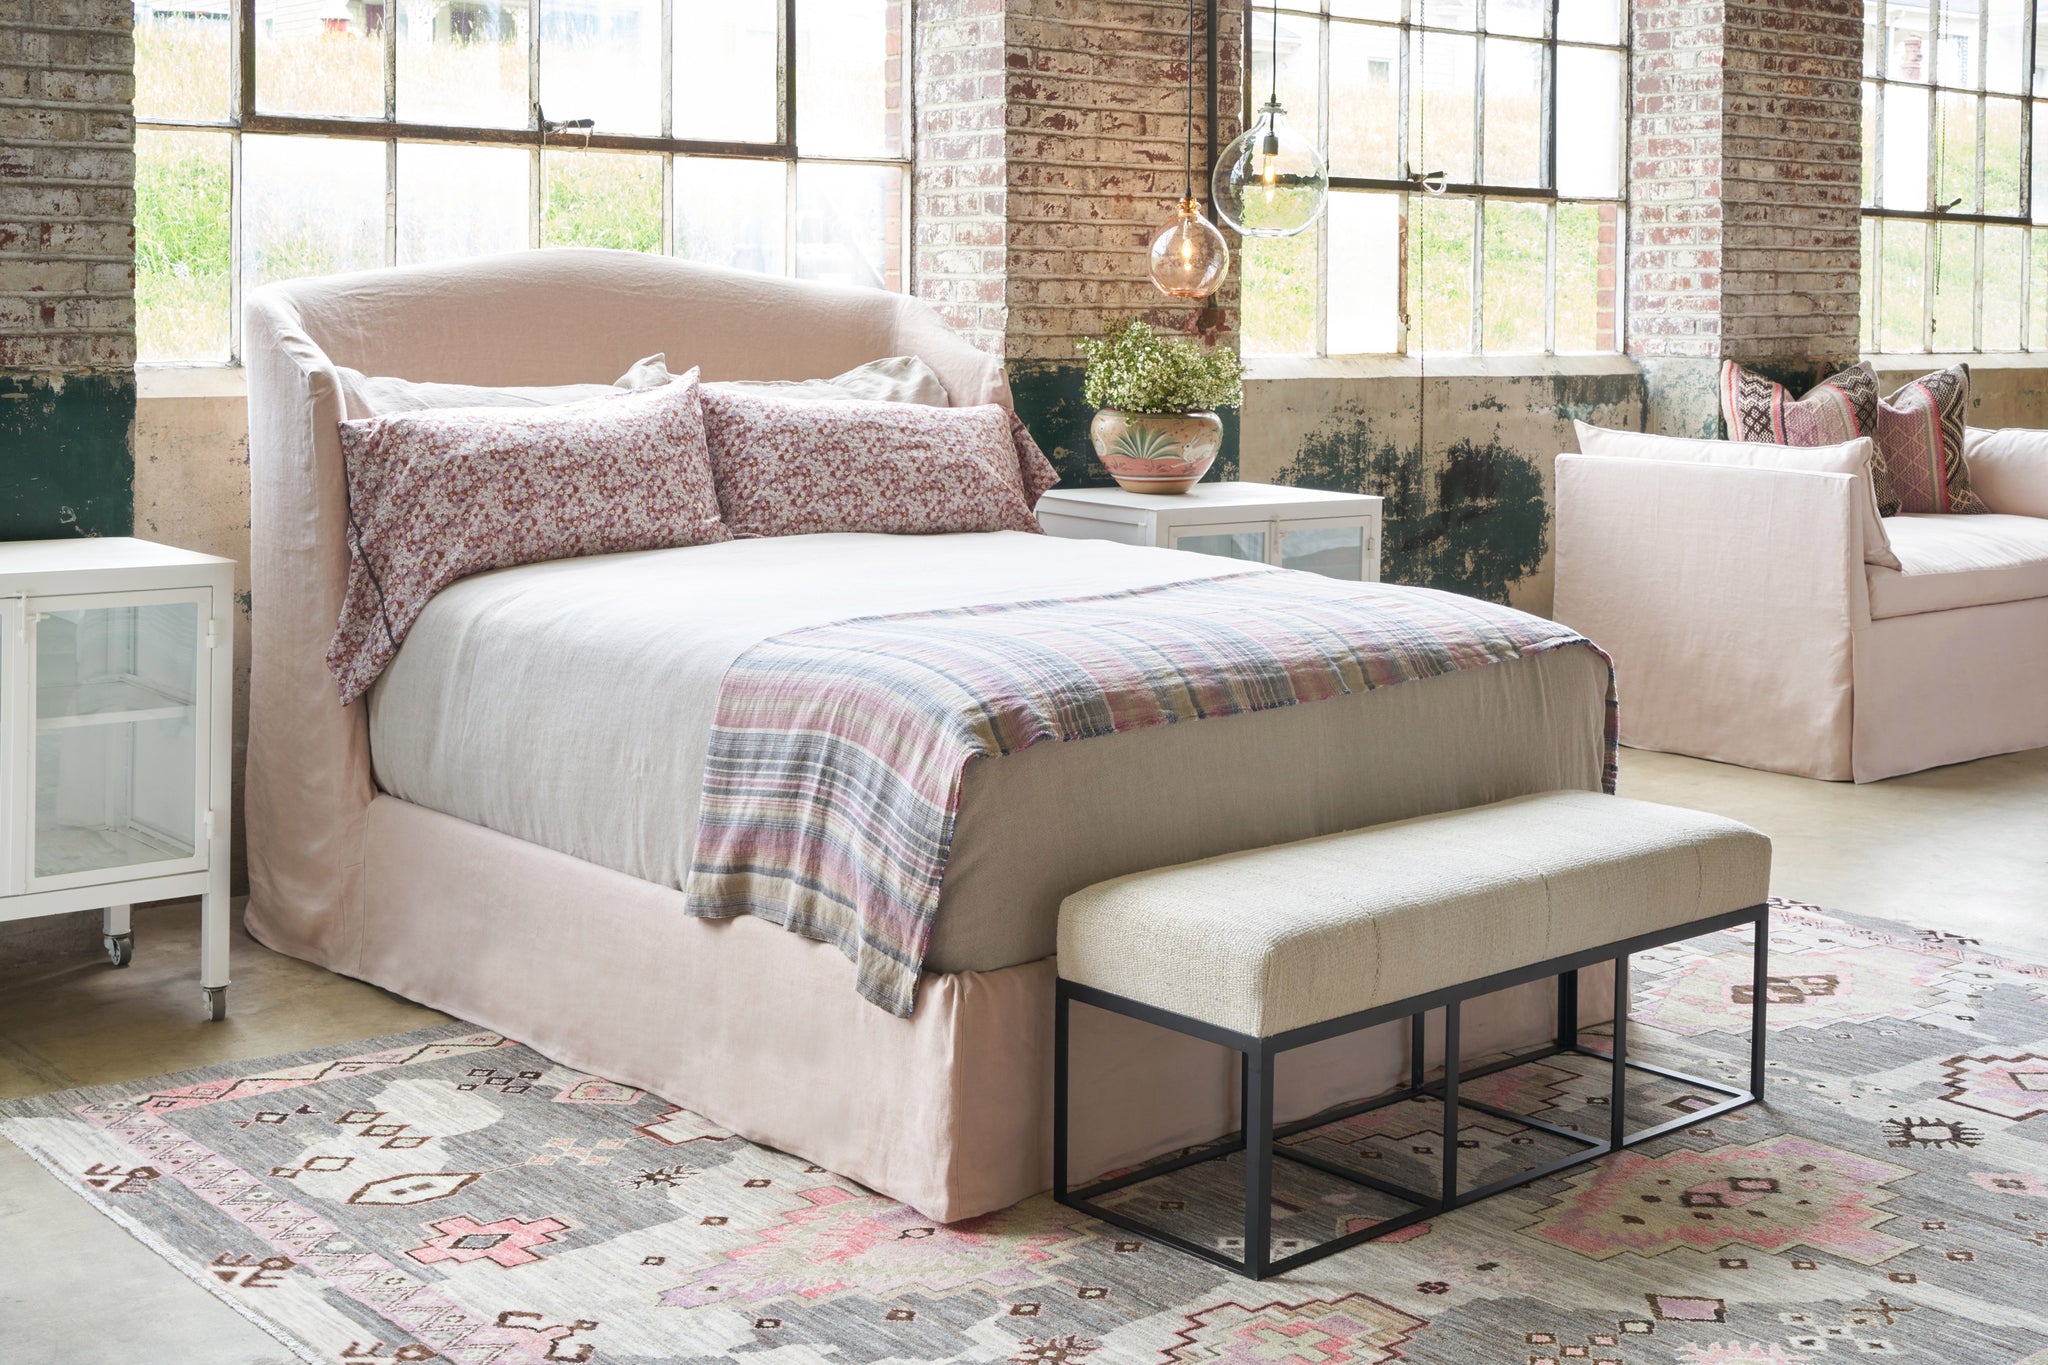  Slipcovered bed in a showroom with large windows behind. A white bench is at the end and a pink daybed is in the background. Photographed in Brevard Rose. 